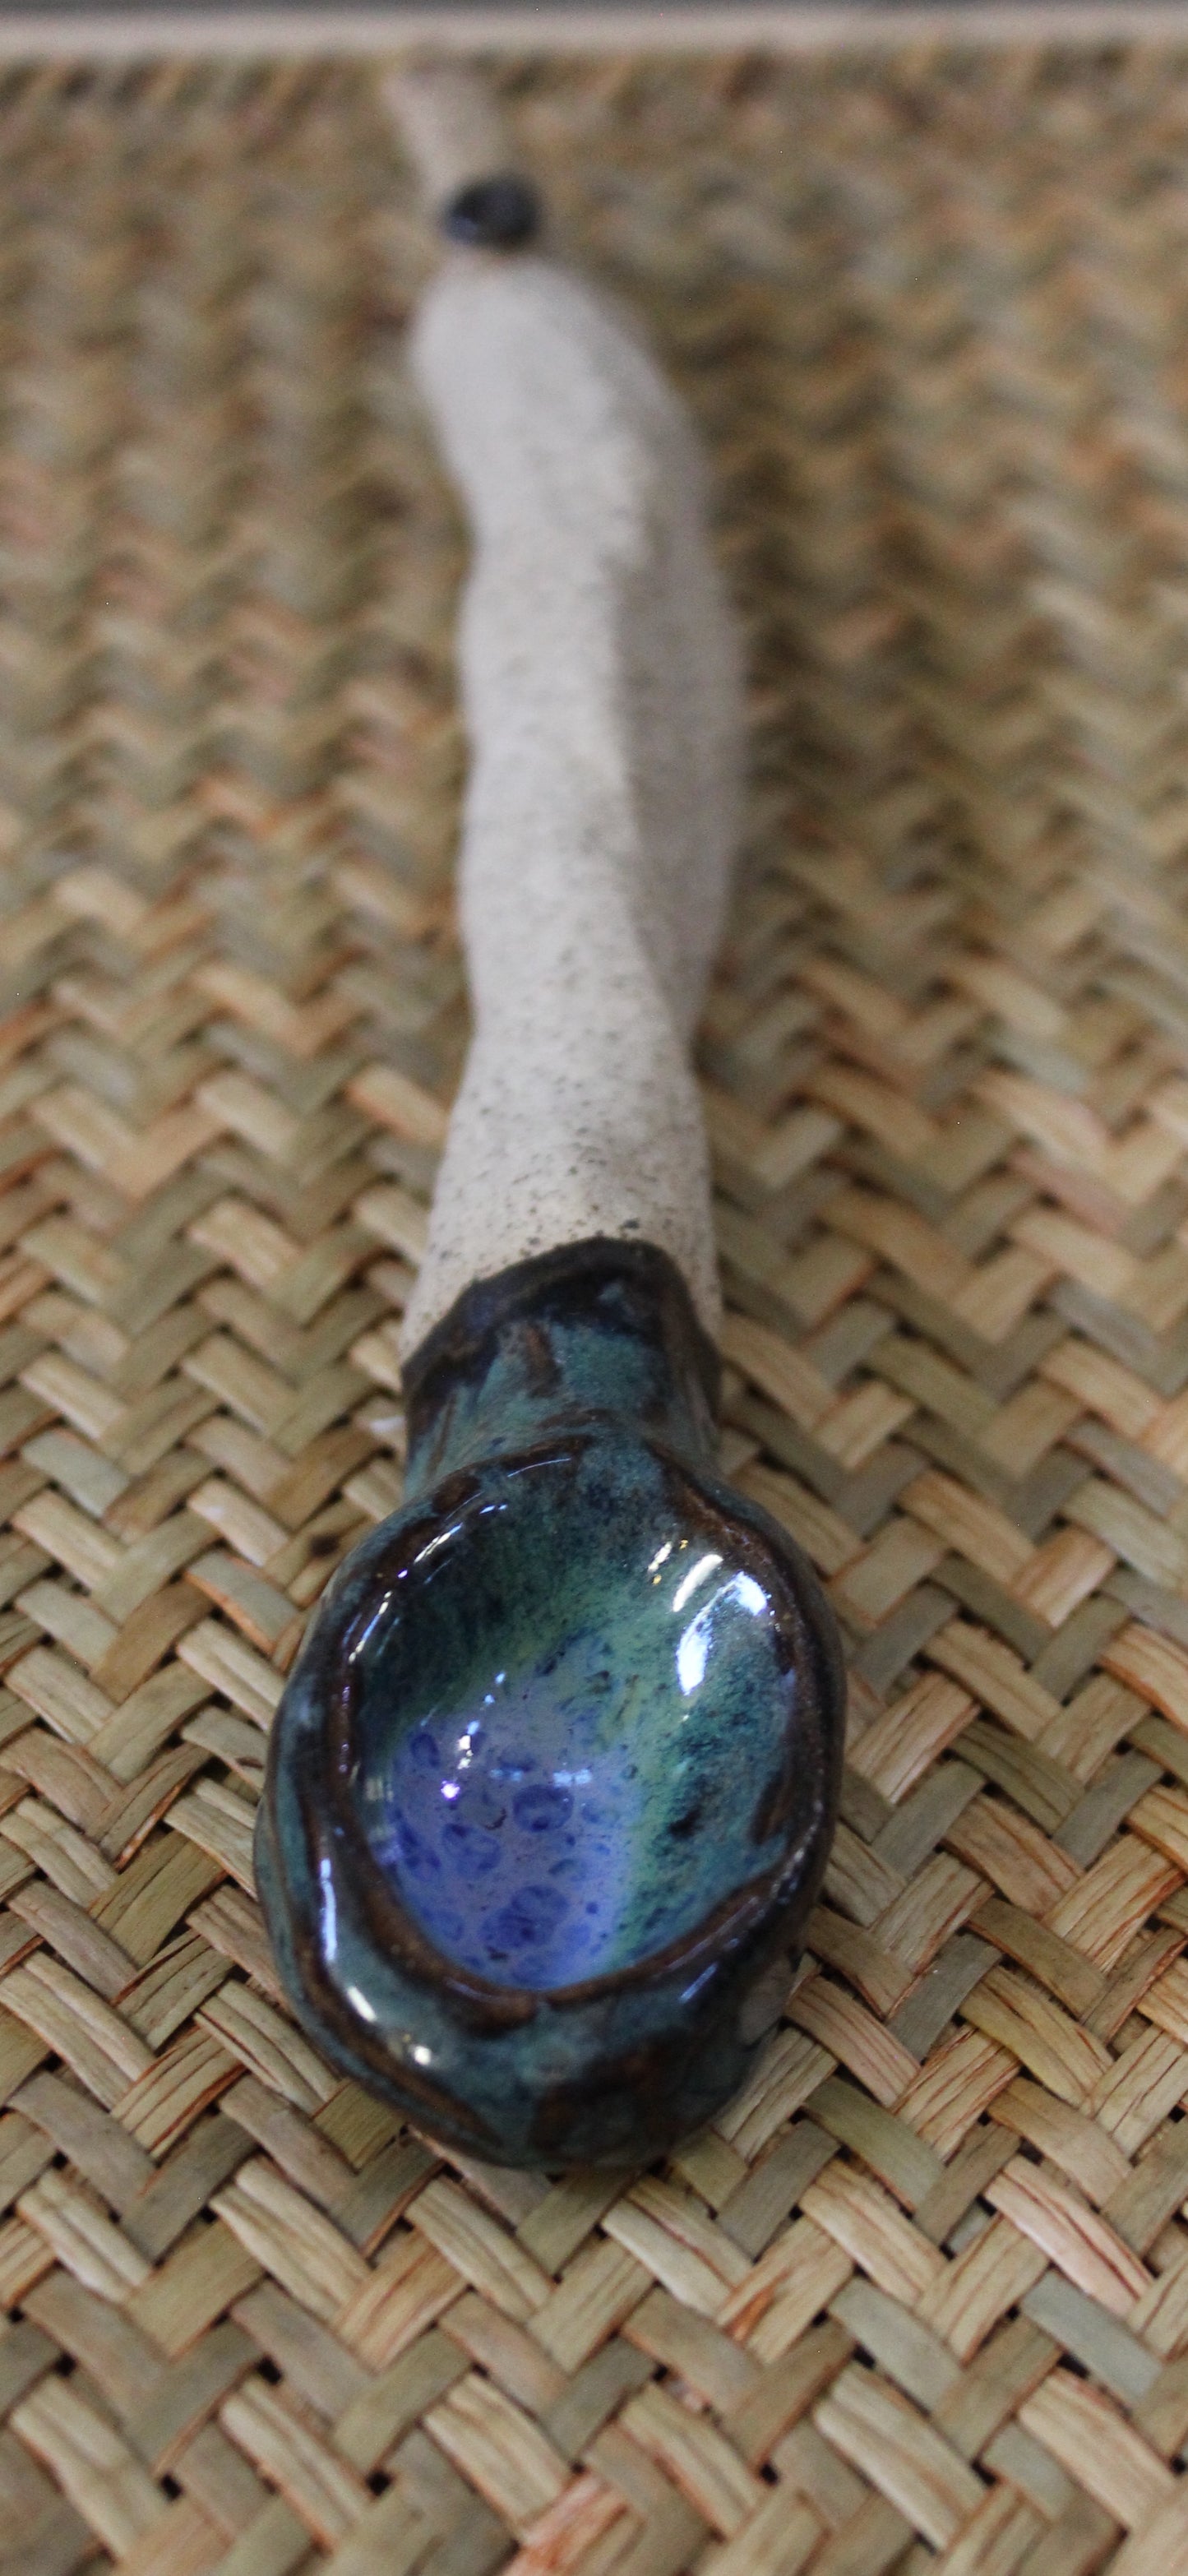 Organic Ceramic Turquoise-Blue Serving Spoon as a Unique Ornament or for Food Consumption